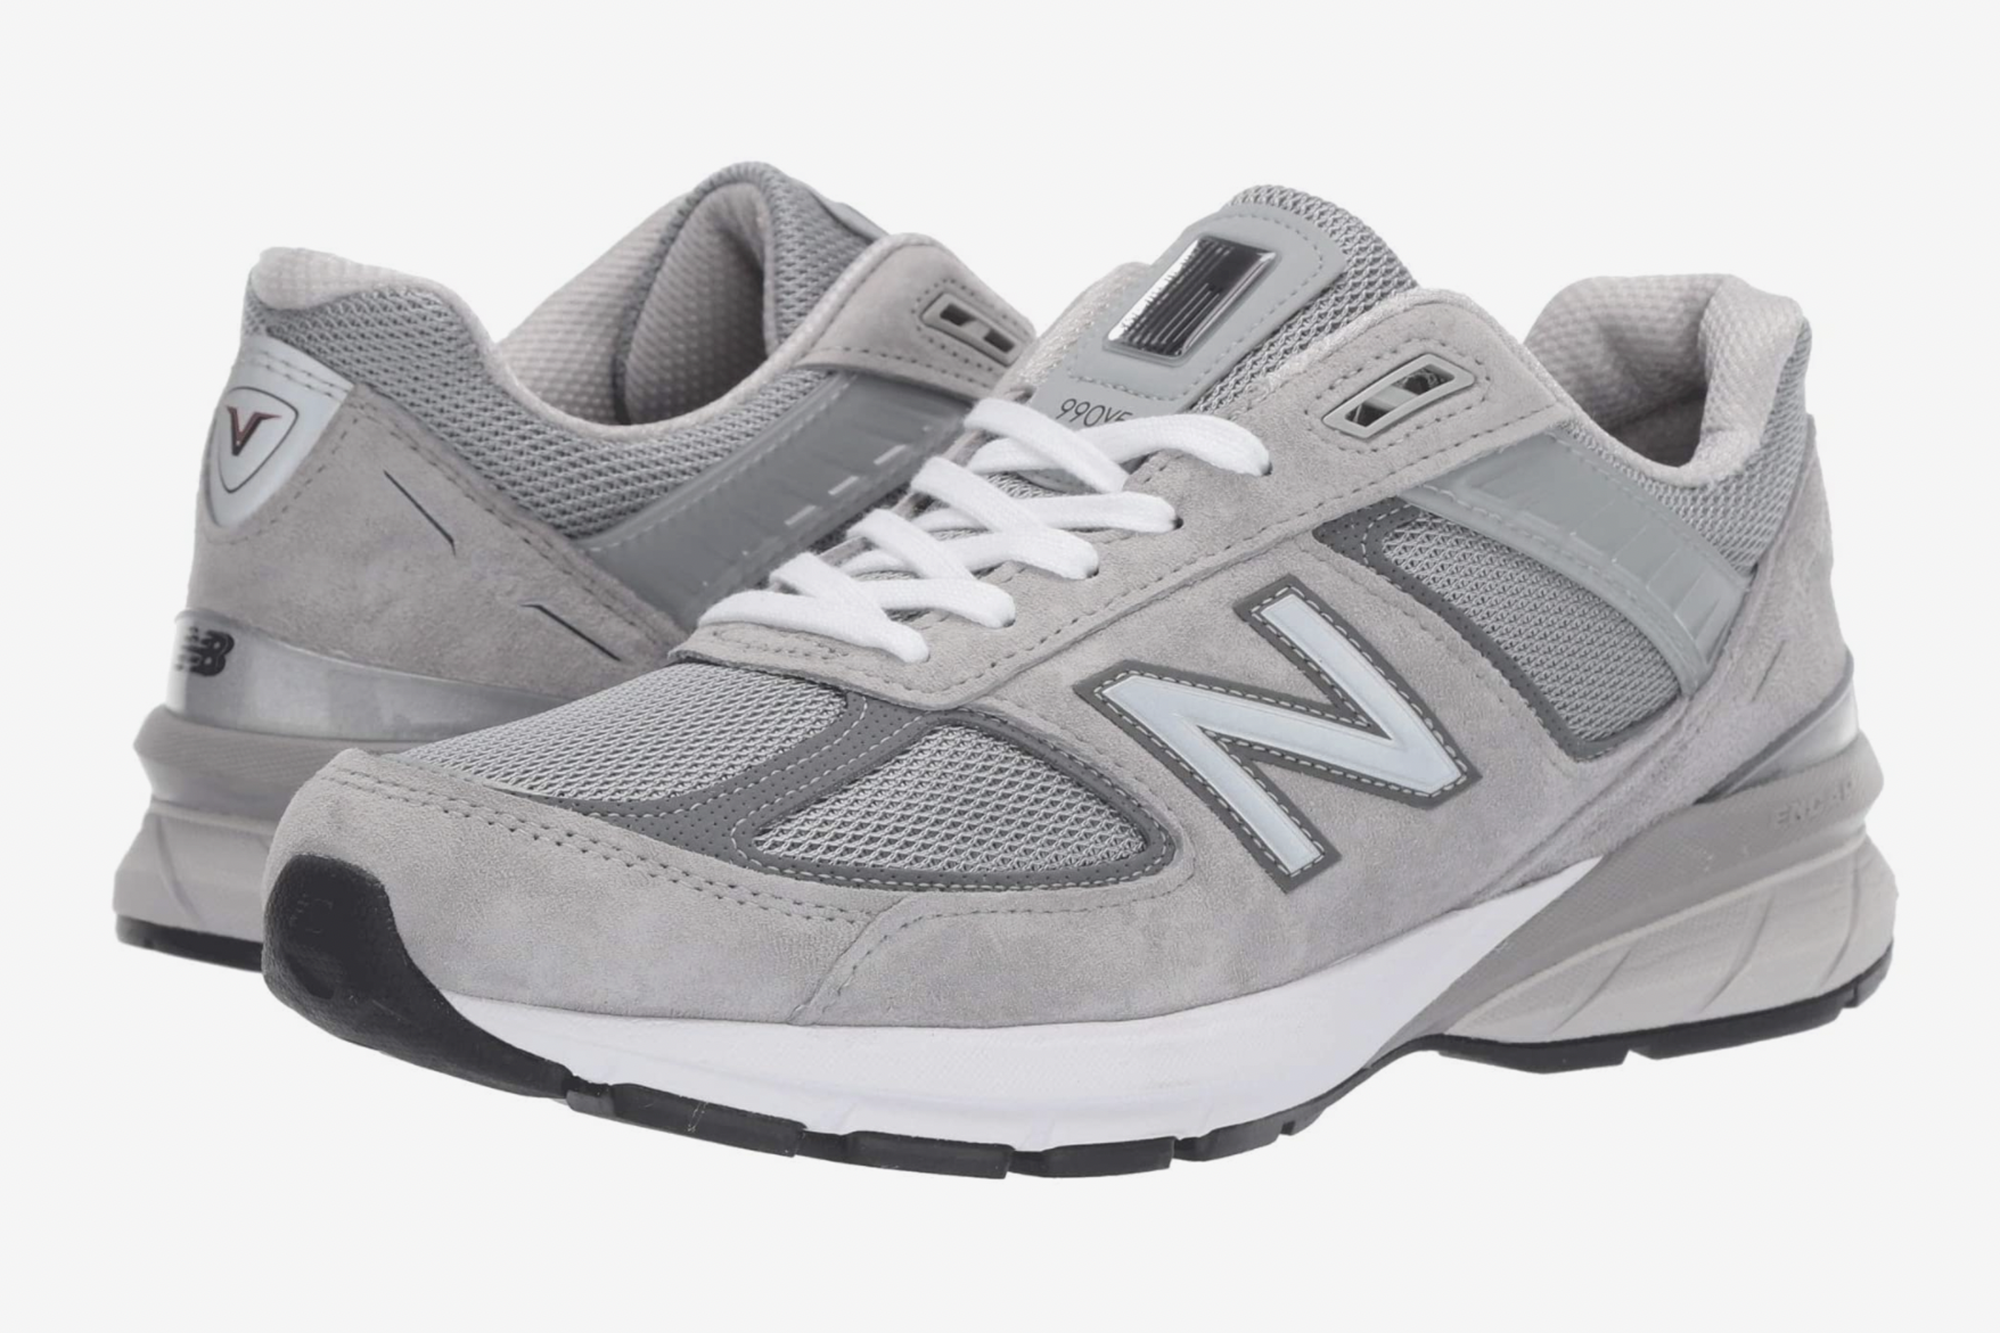 new balance mens shoes zappos